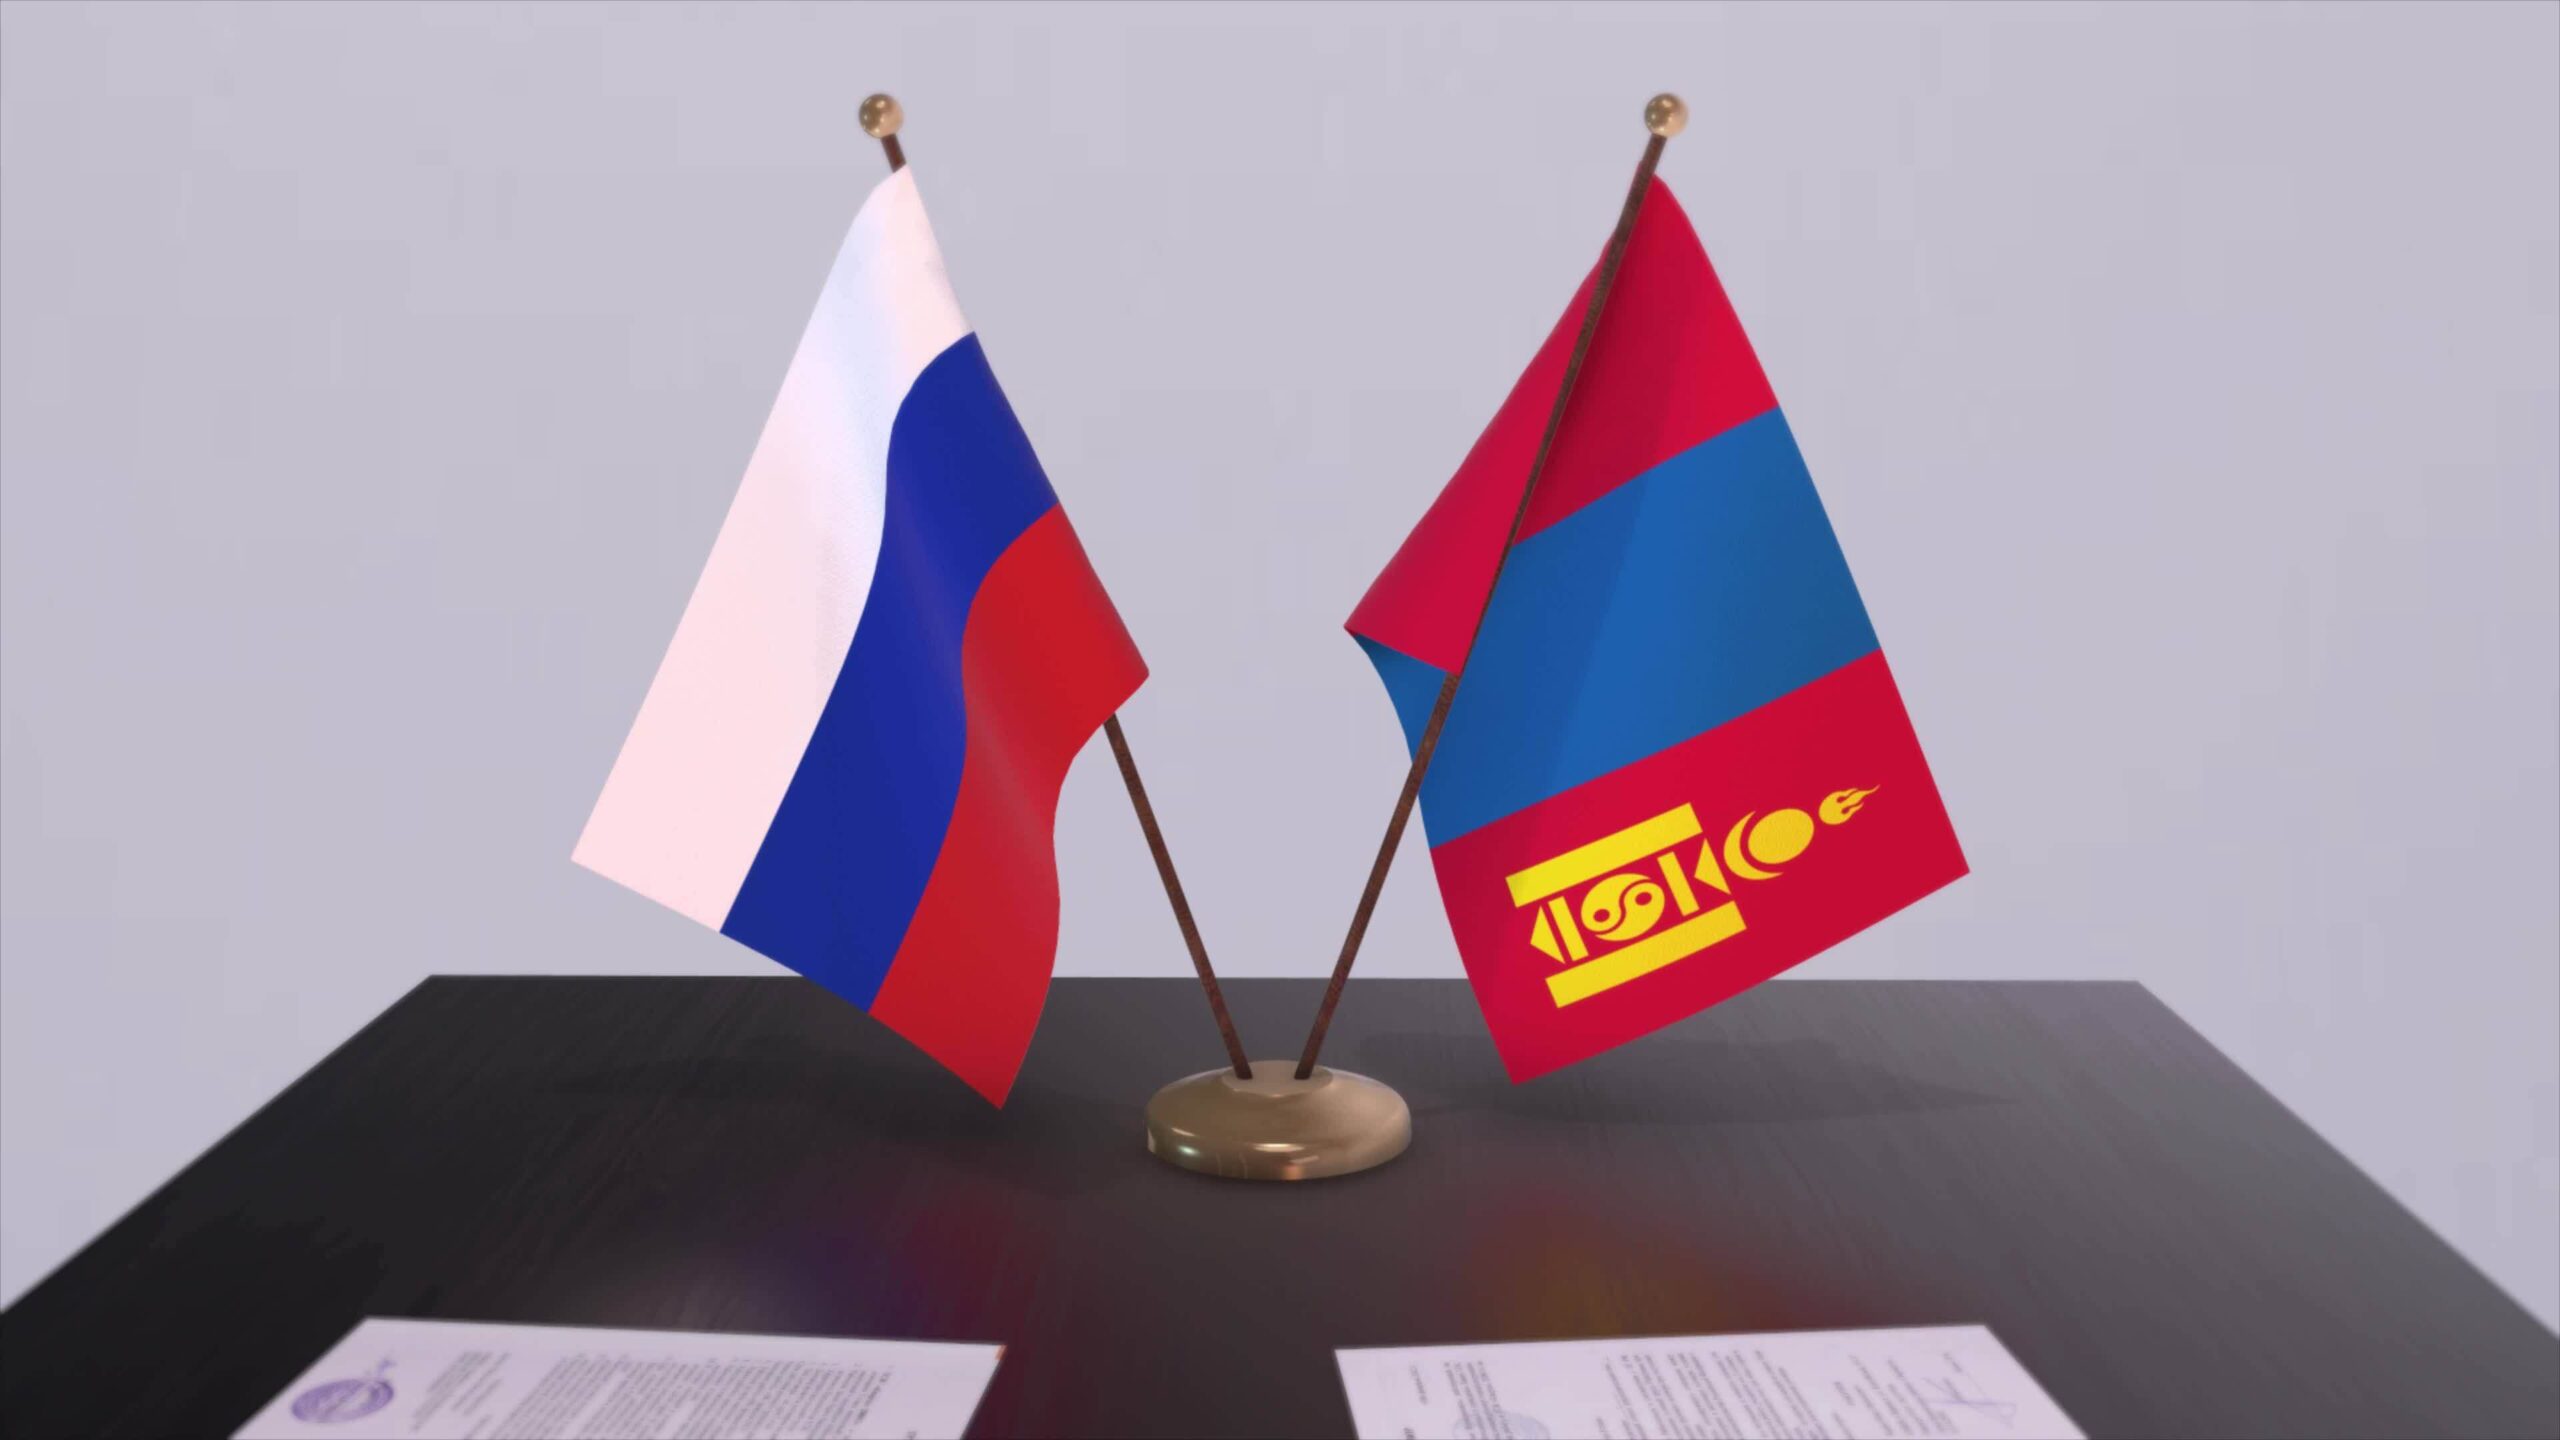 mongolia and russia national flag business meeting or diplomacy deal politics agreement animation video scaled